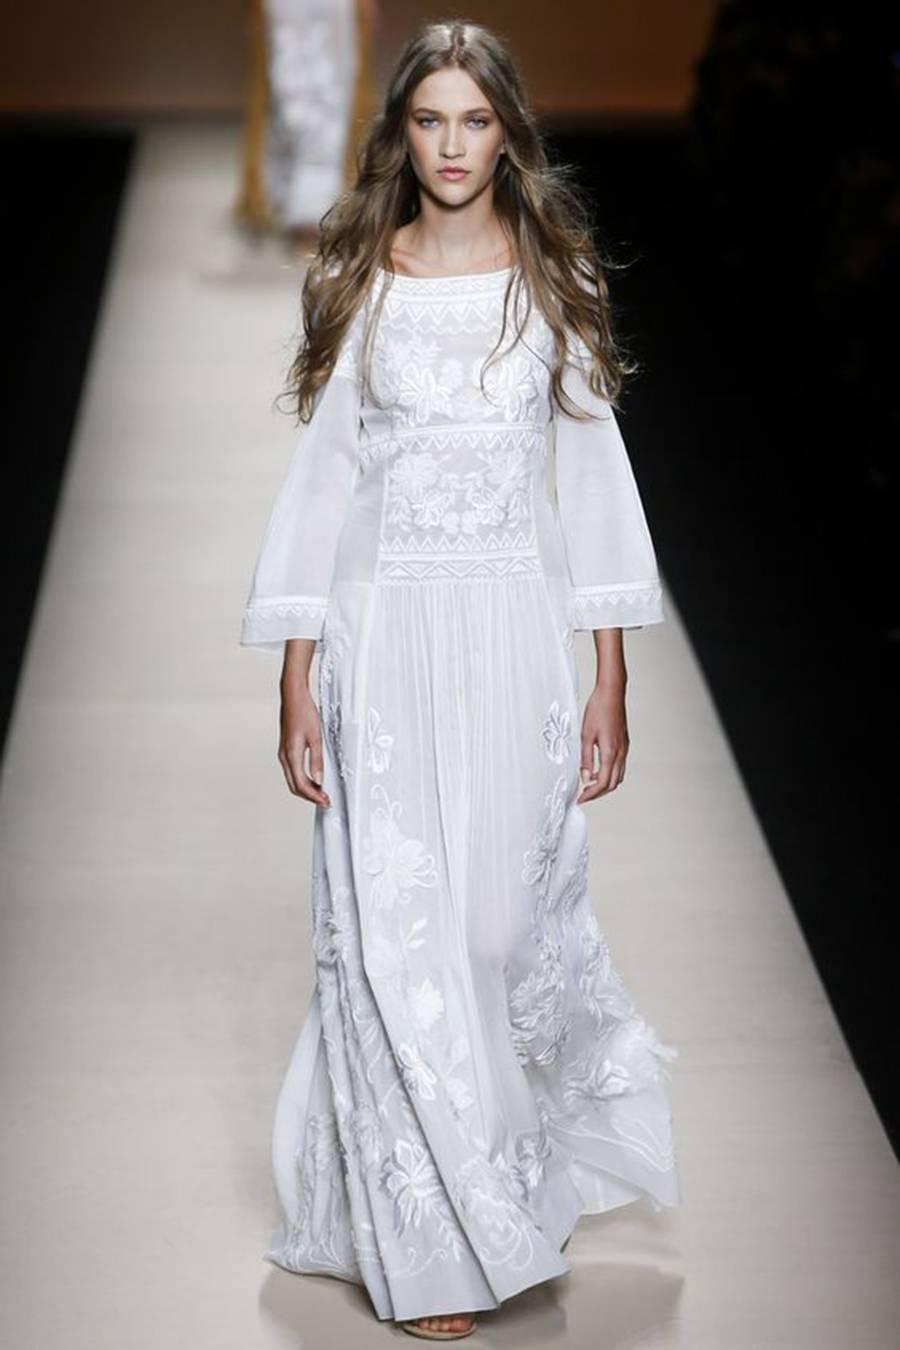 Alberta Ferretti's ethereal white gown is in line with the season's romantic bohemian mood. This silk-chiffon runway style is teeming with floral embroidery and appliqués, while the semi-sheer finish is tempered with a silk slip. White silk-chiffon.